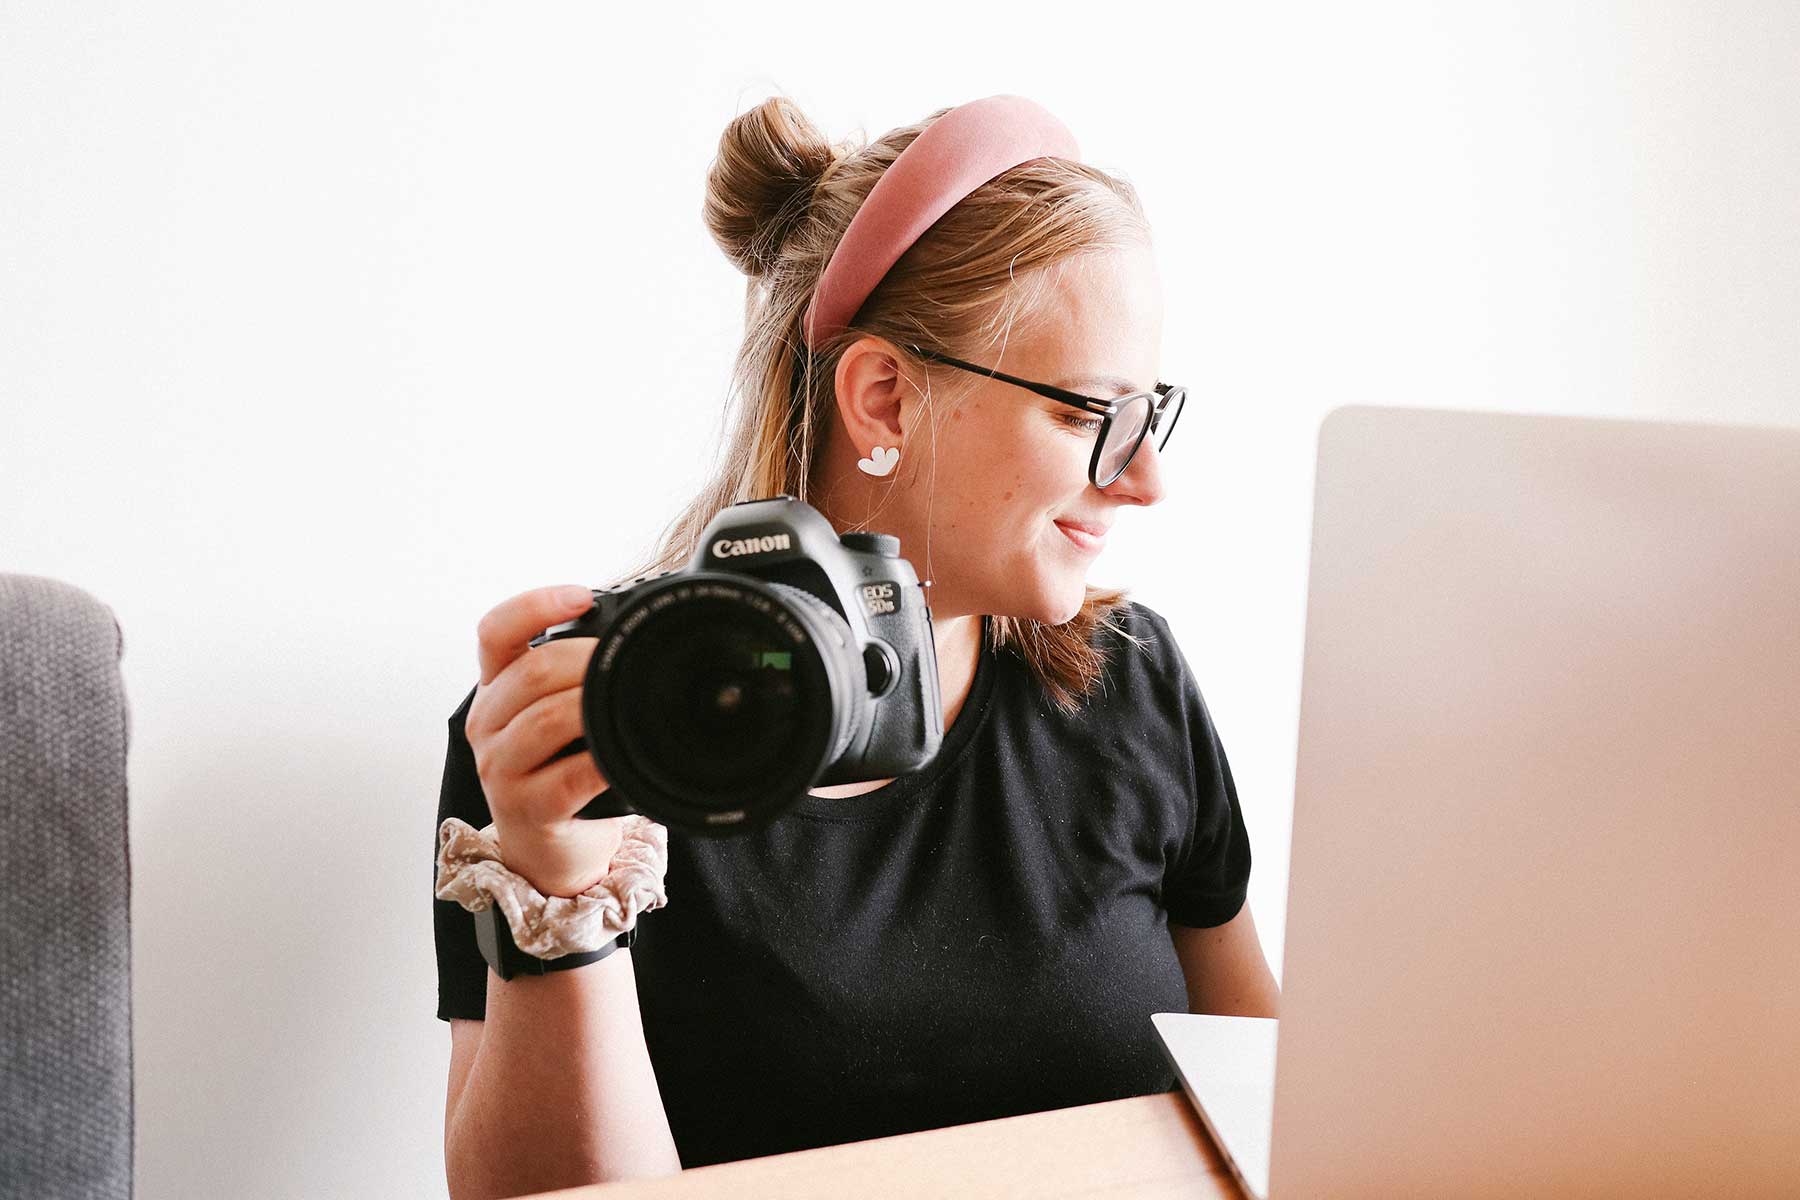 5 things to look for when hiring a product photographer